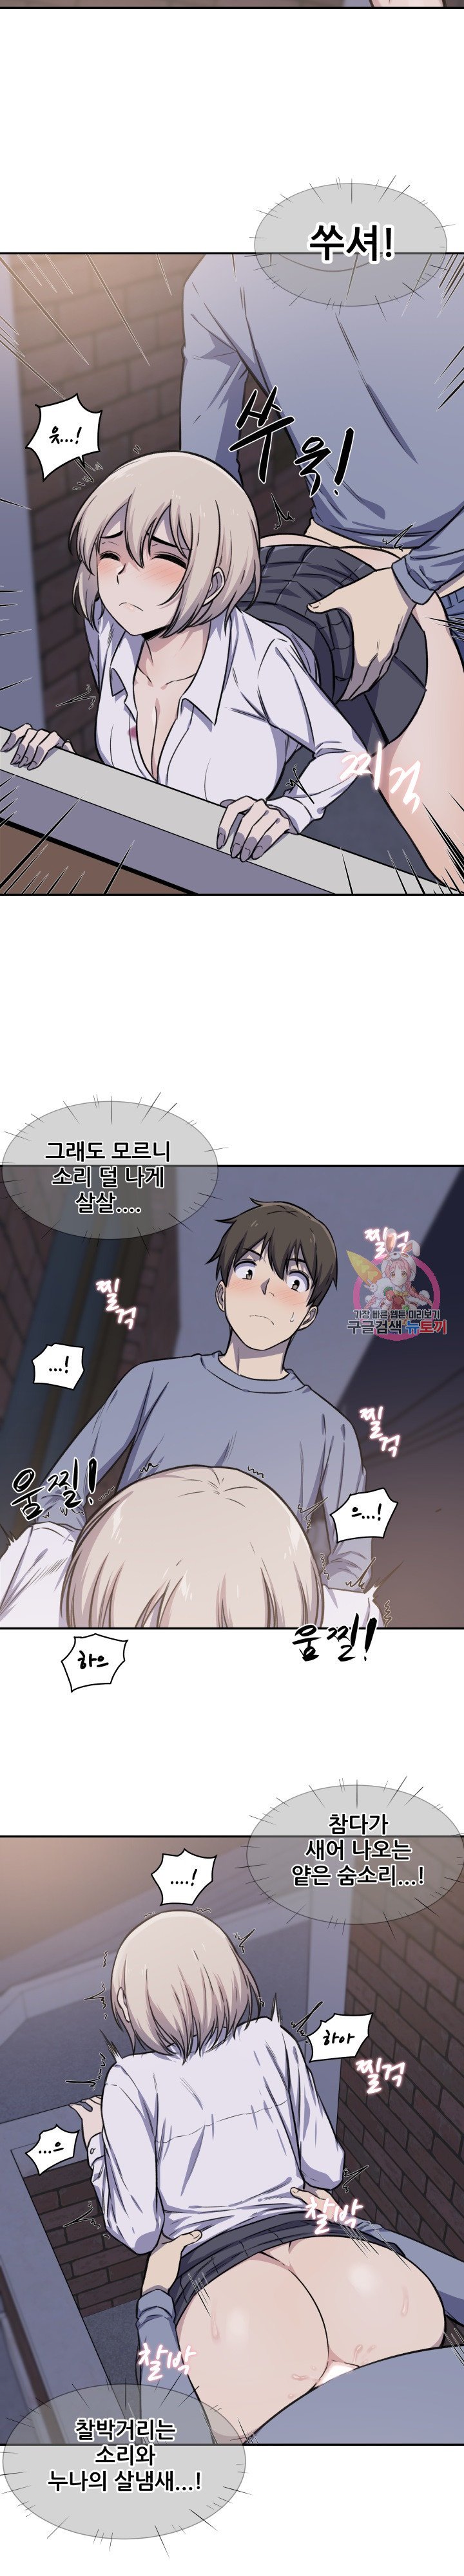 the-ark-is-me-raw-chap-30-19